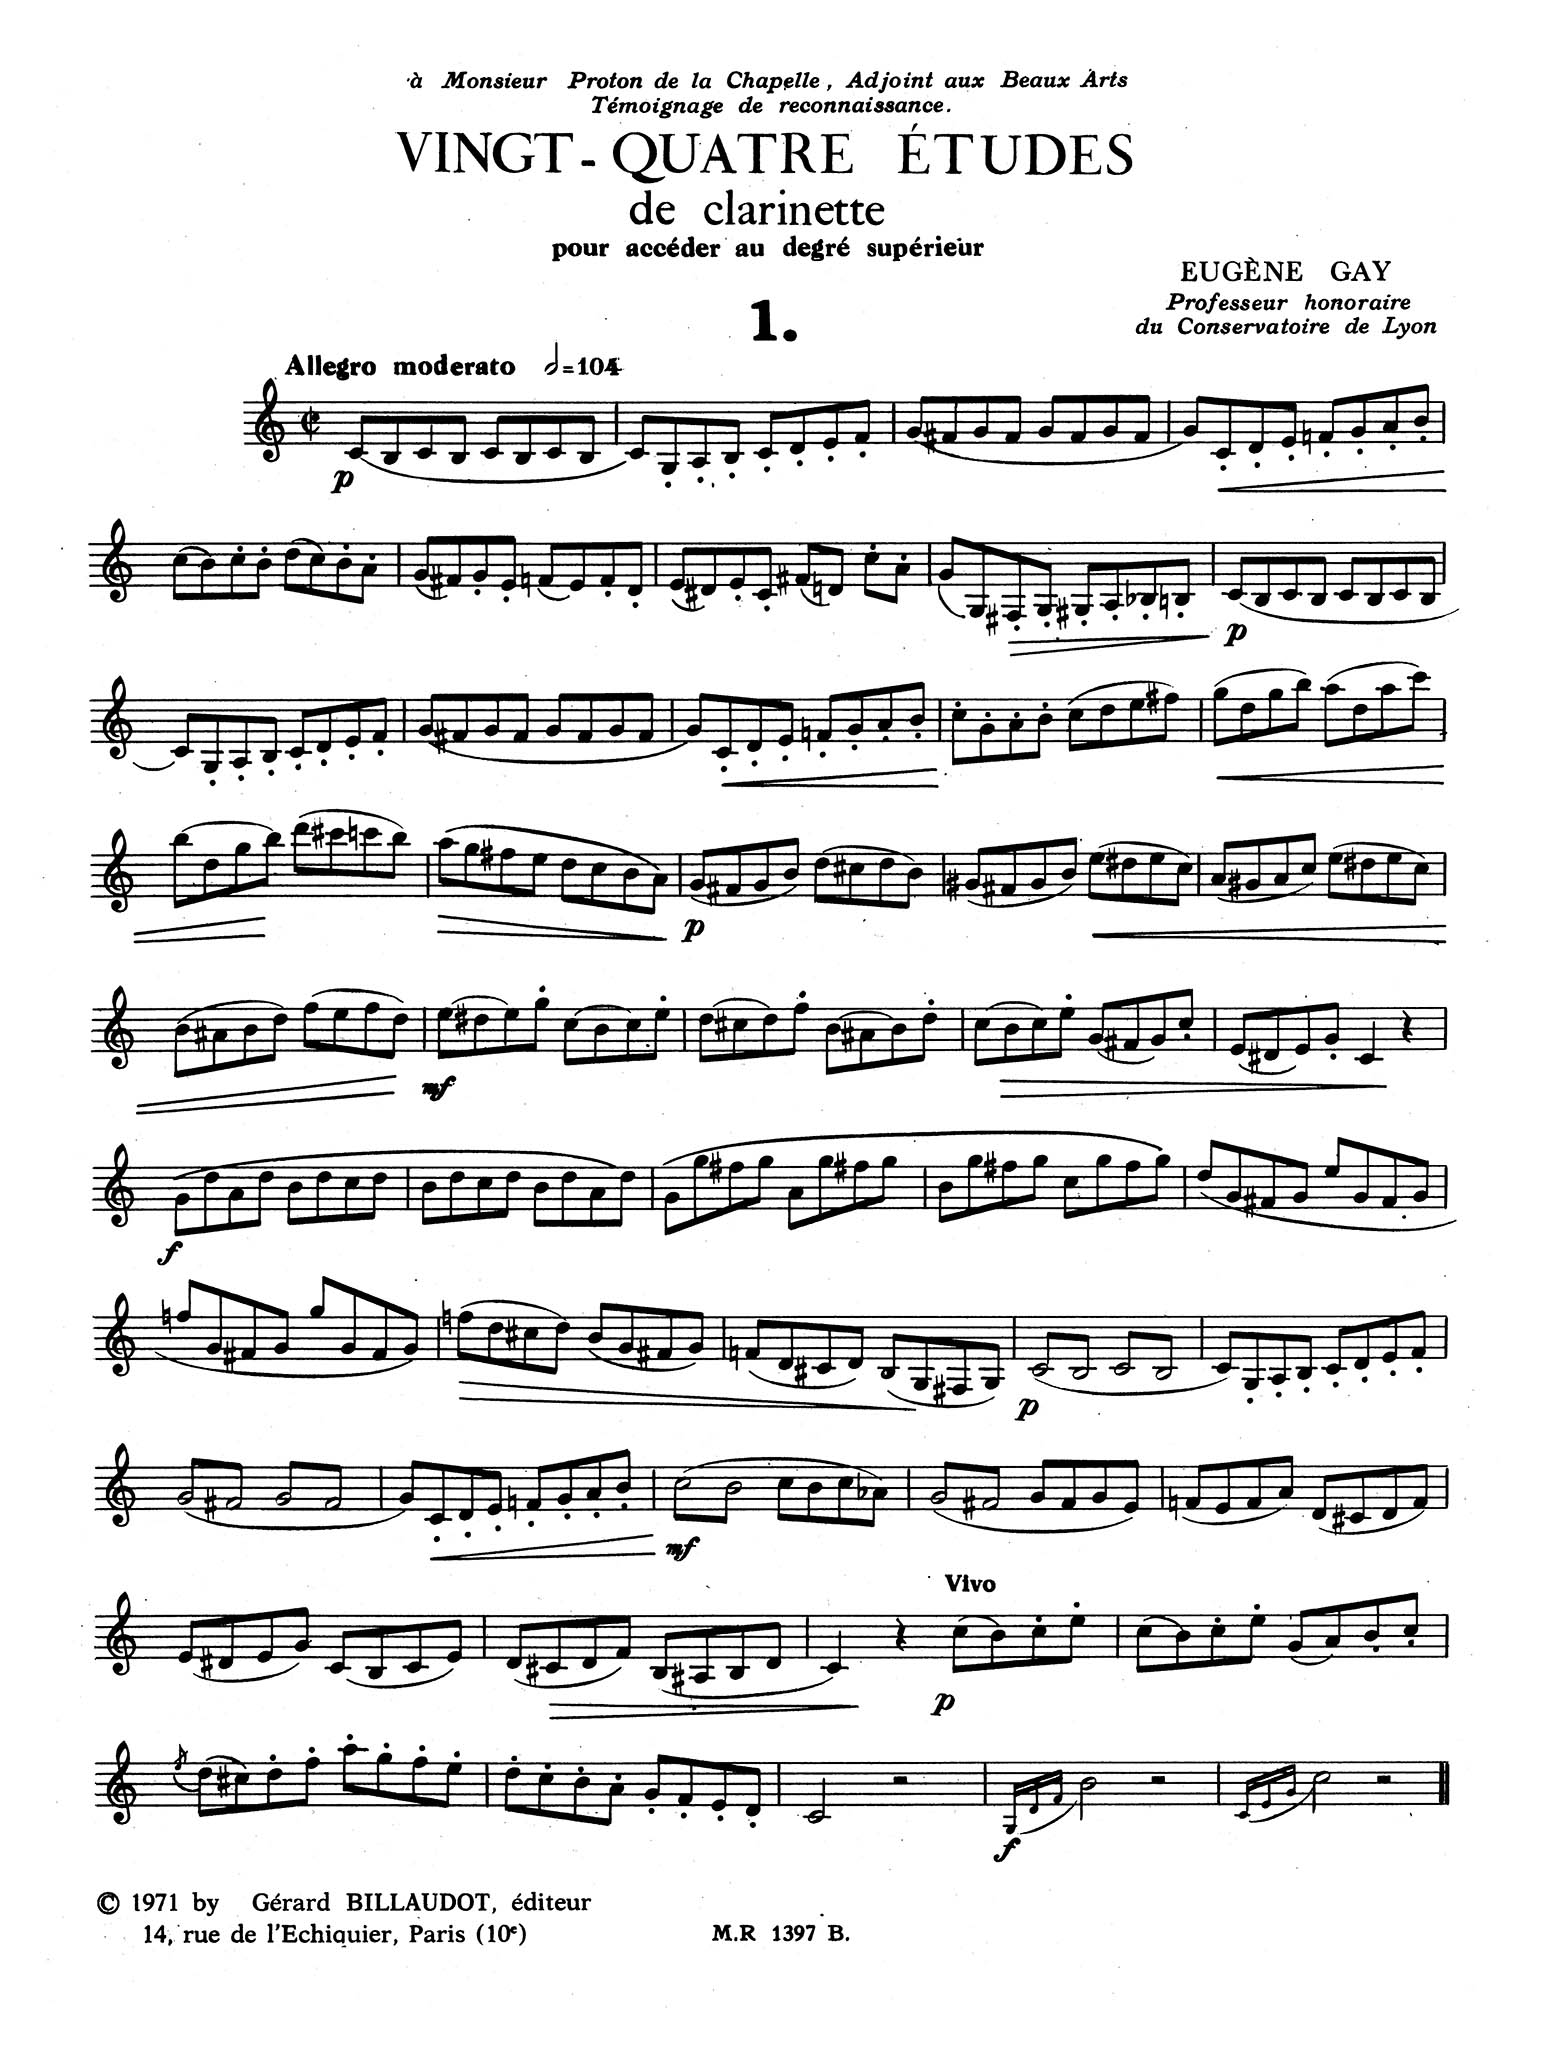 24 Etudes for Clarinet Page 1